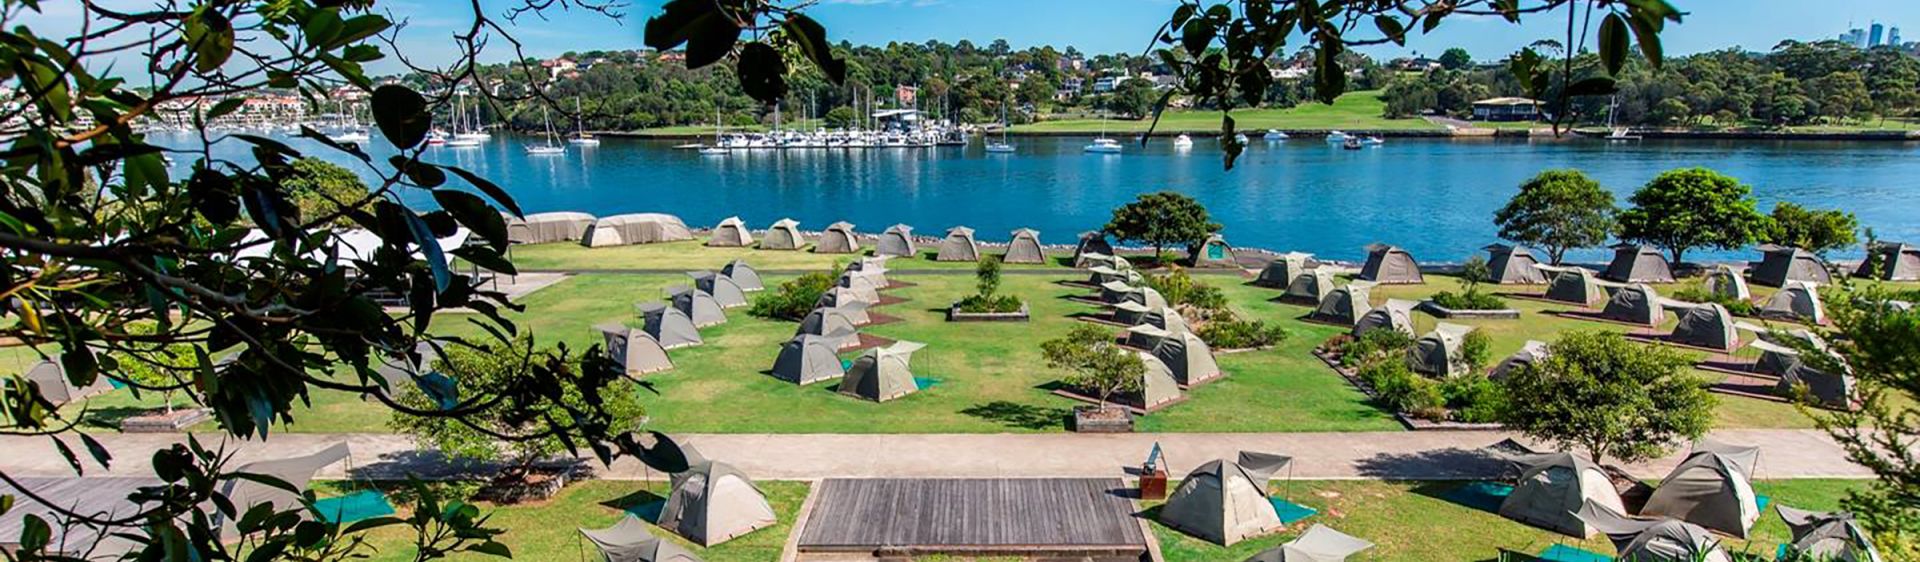 Camping on Cockatoo Island - Sydney Harbour